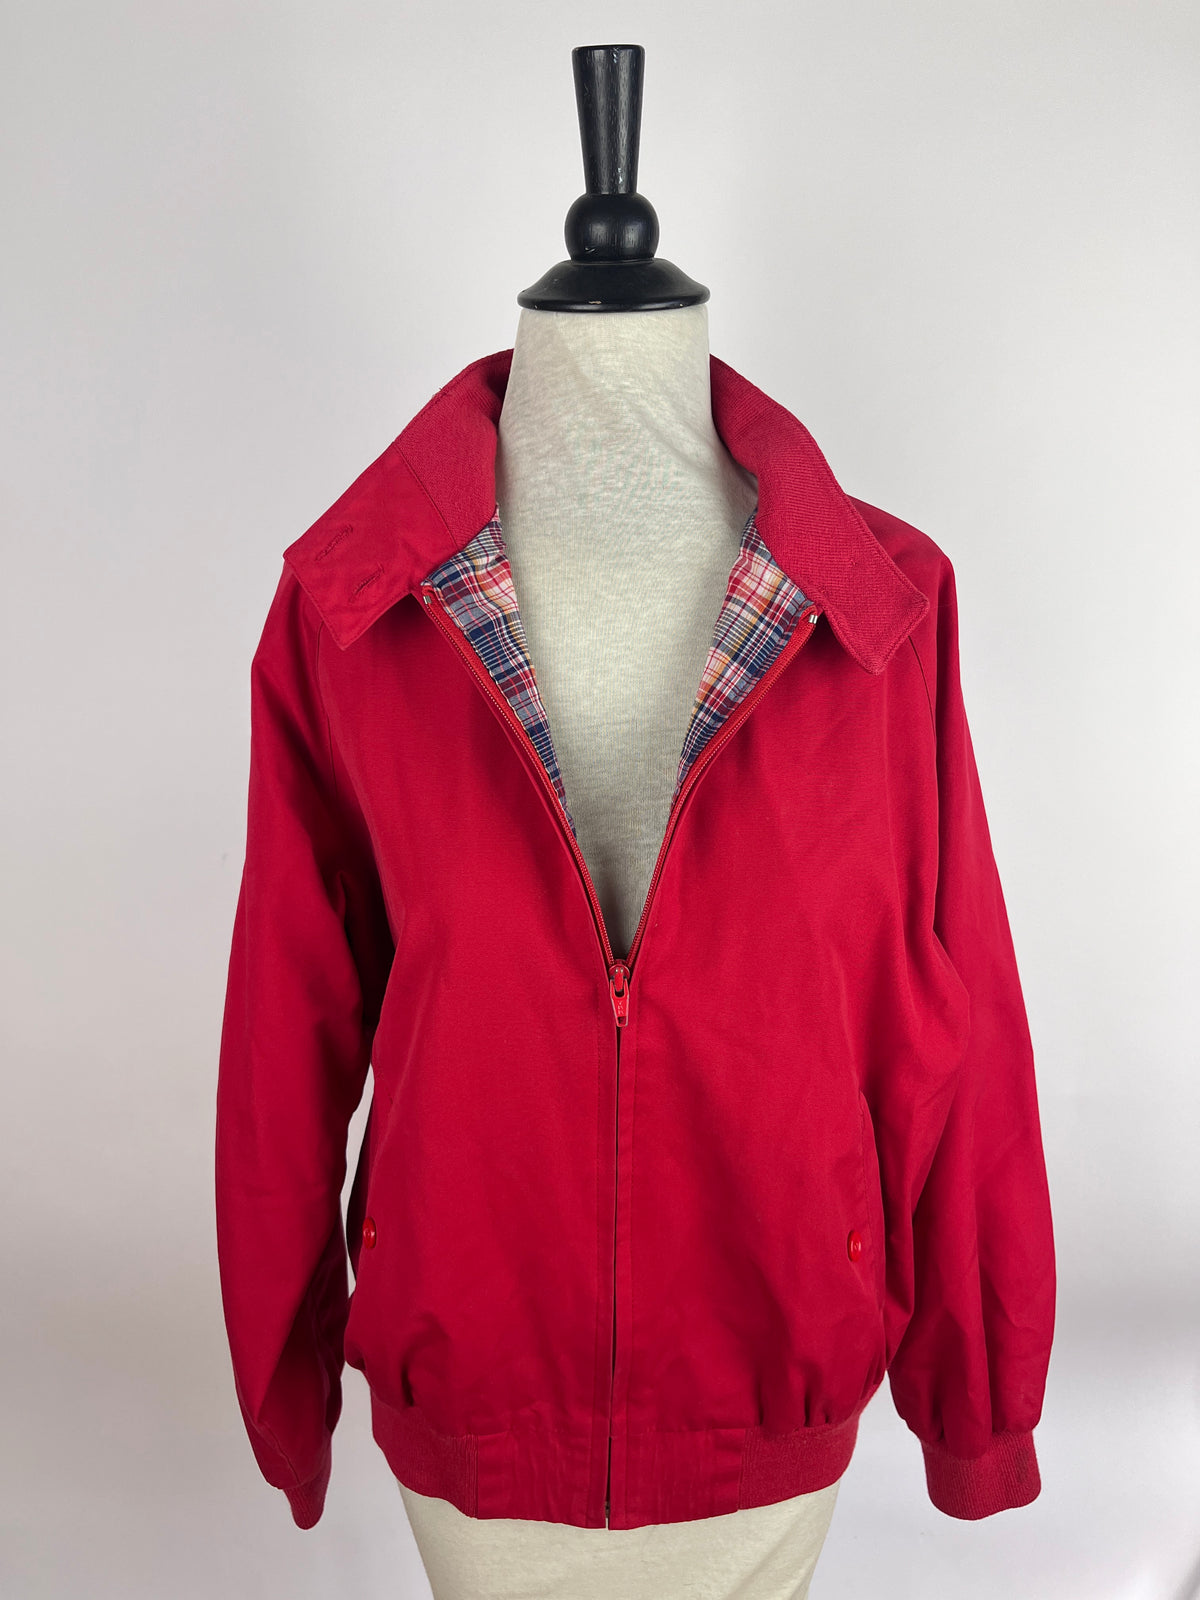 Red Vintage Jacket with Plaid Lining